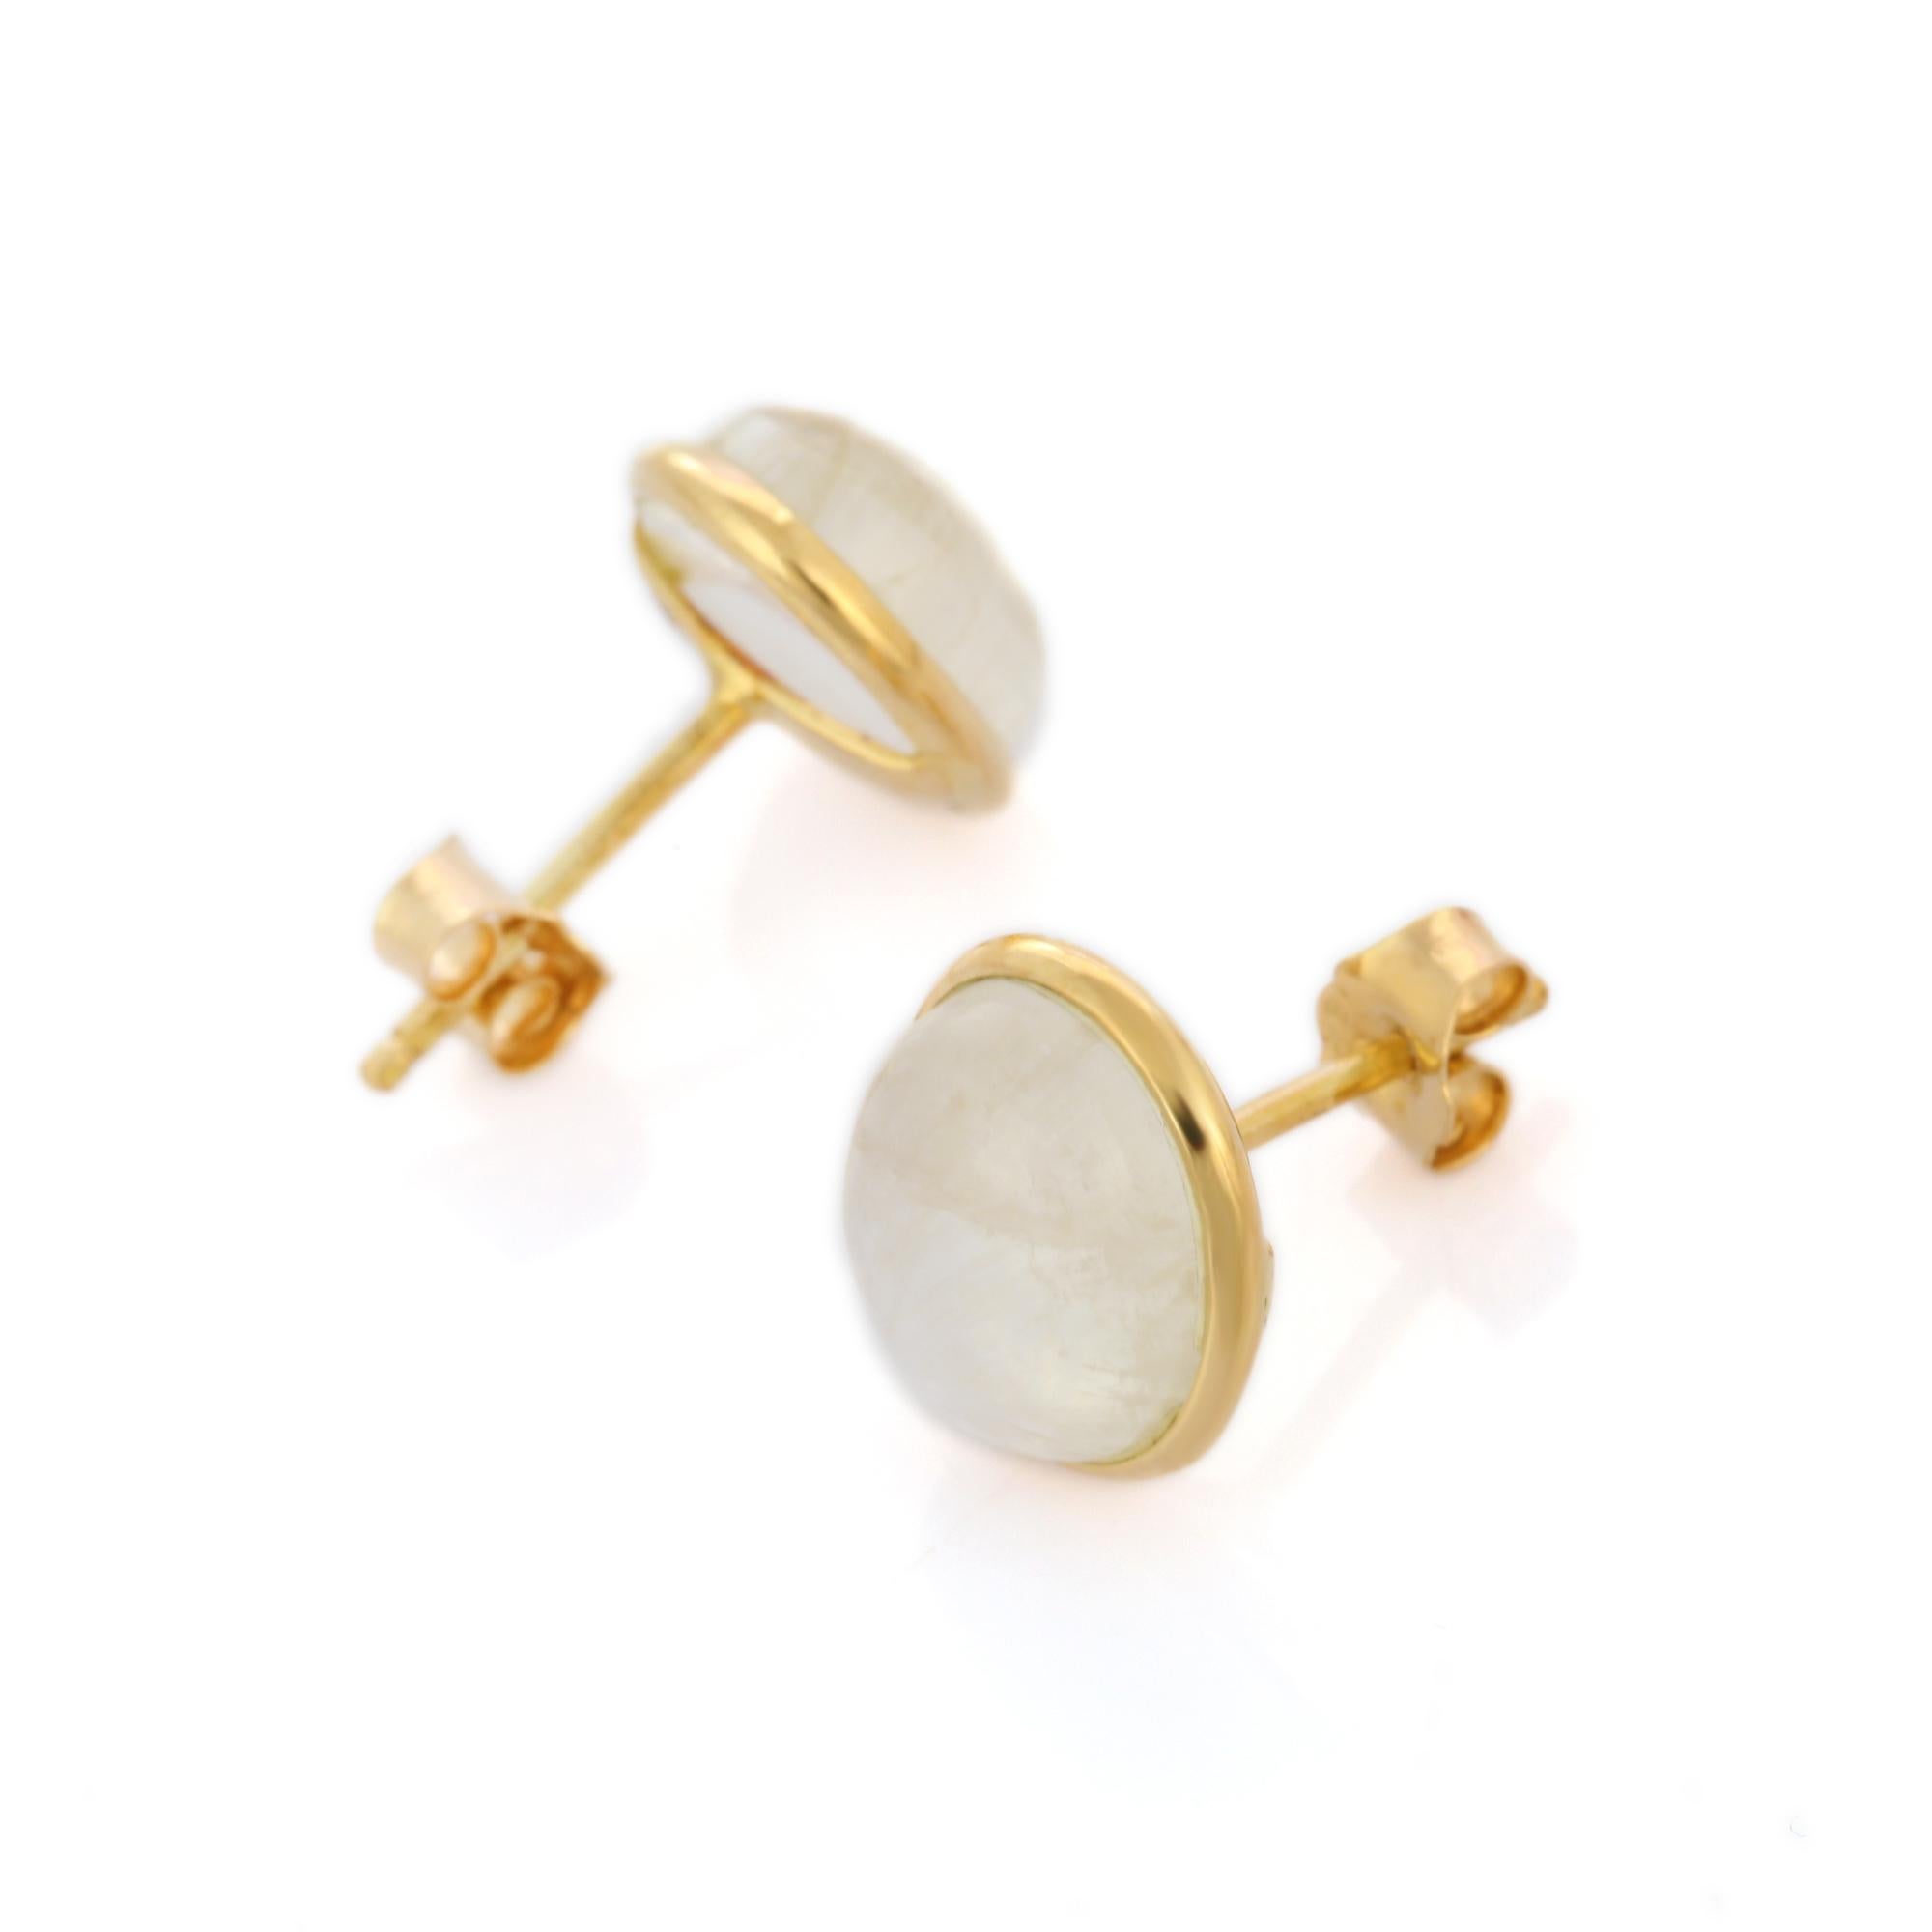 Studs create a subtle beauty while showcasing the colors of the natural precious gemstones.

Dainty oval cut rose moonstone pushback studs in 18K gold. Embrace your look with these stunning pair of earrings suitable for any occasion to complete your